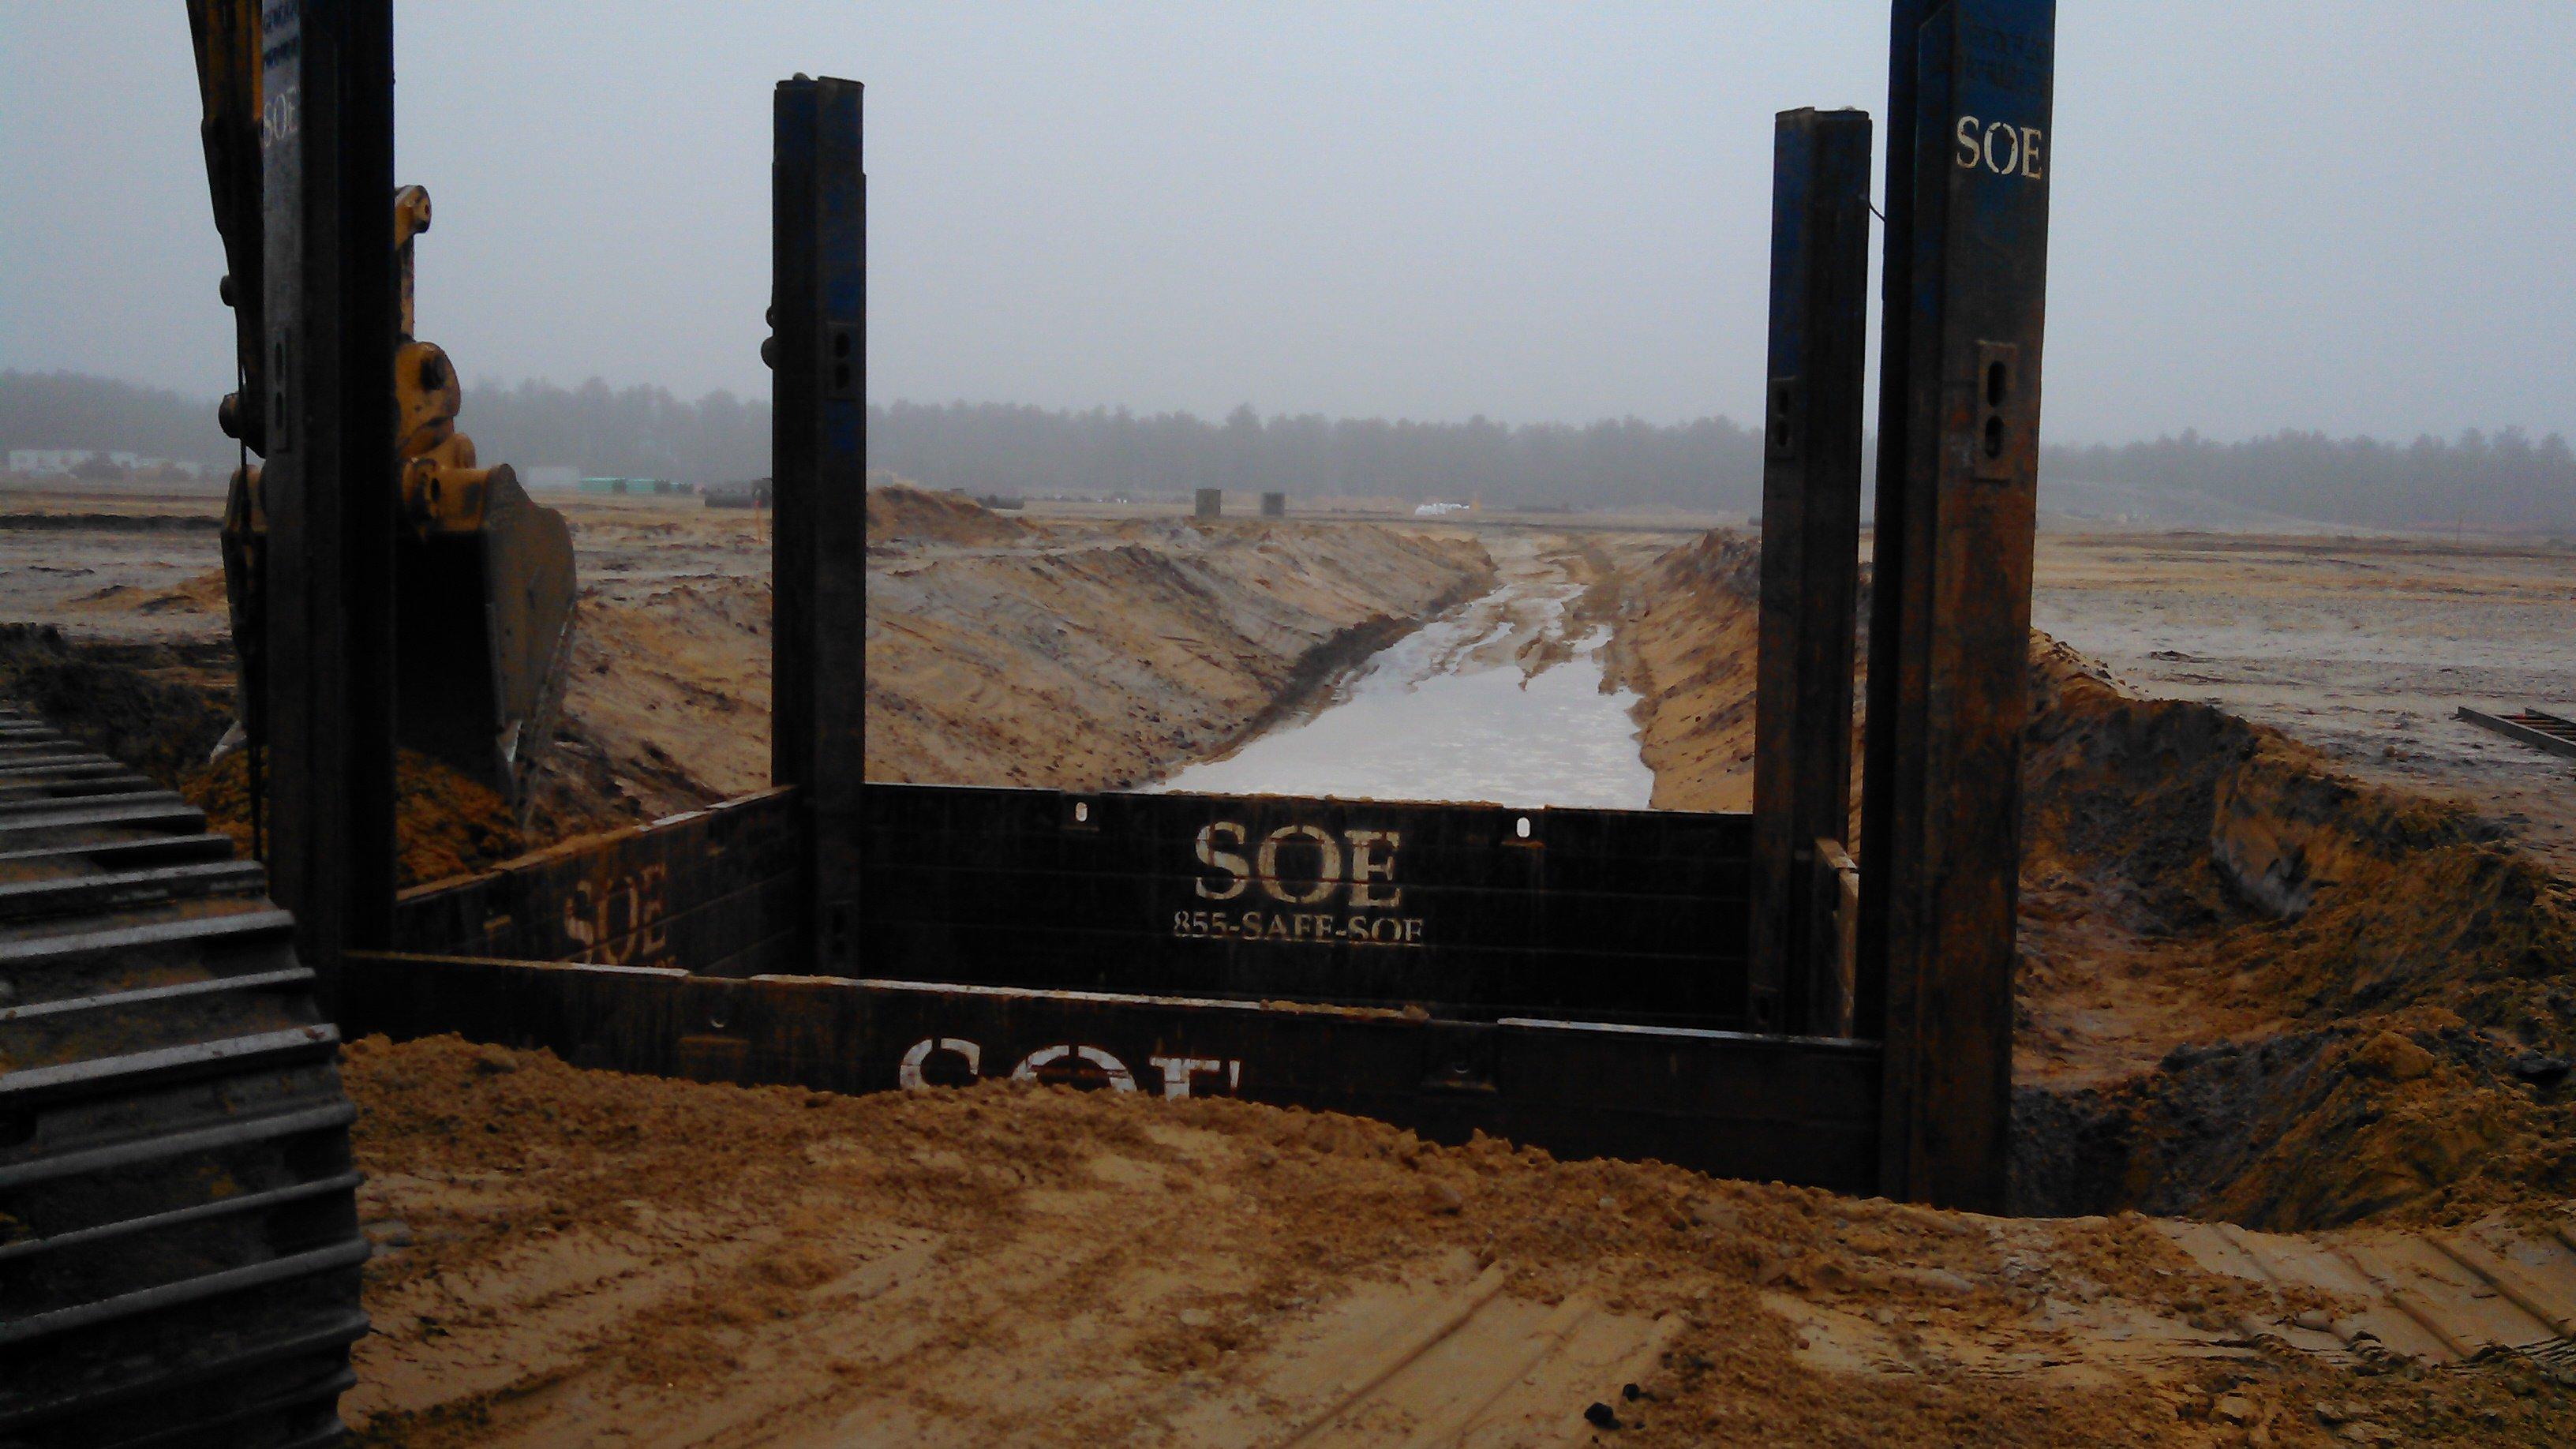 Support of Excavation (SOE) - Construction Information Systems